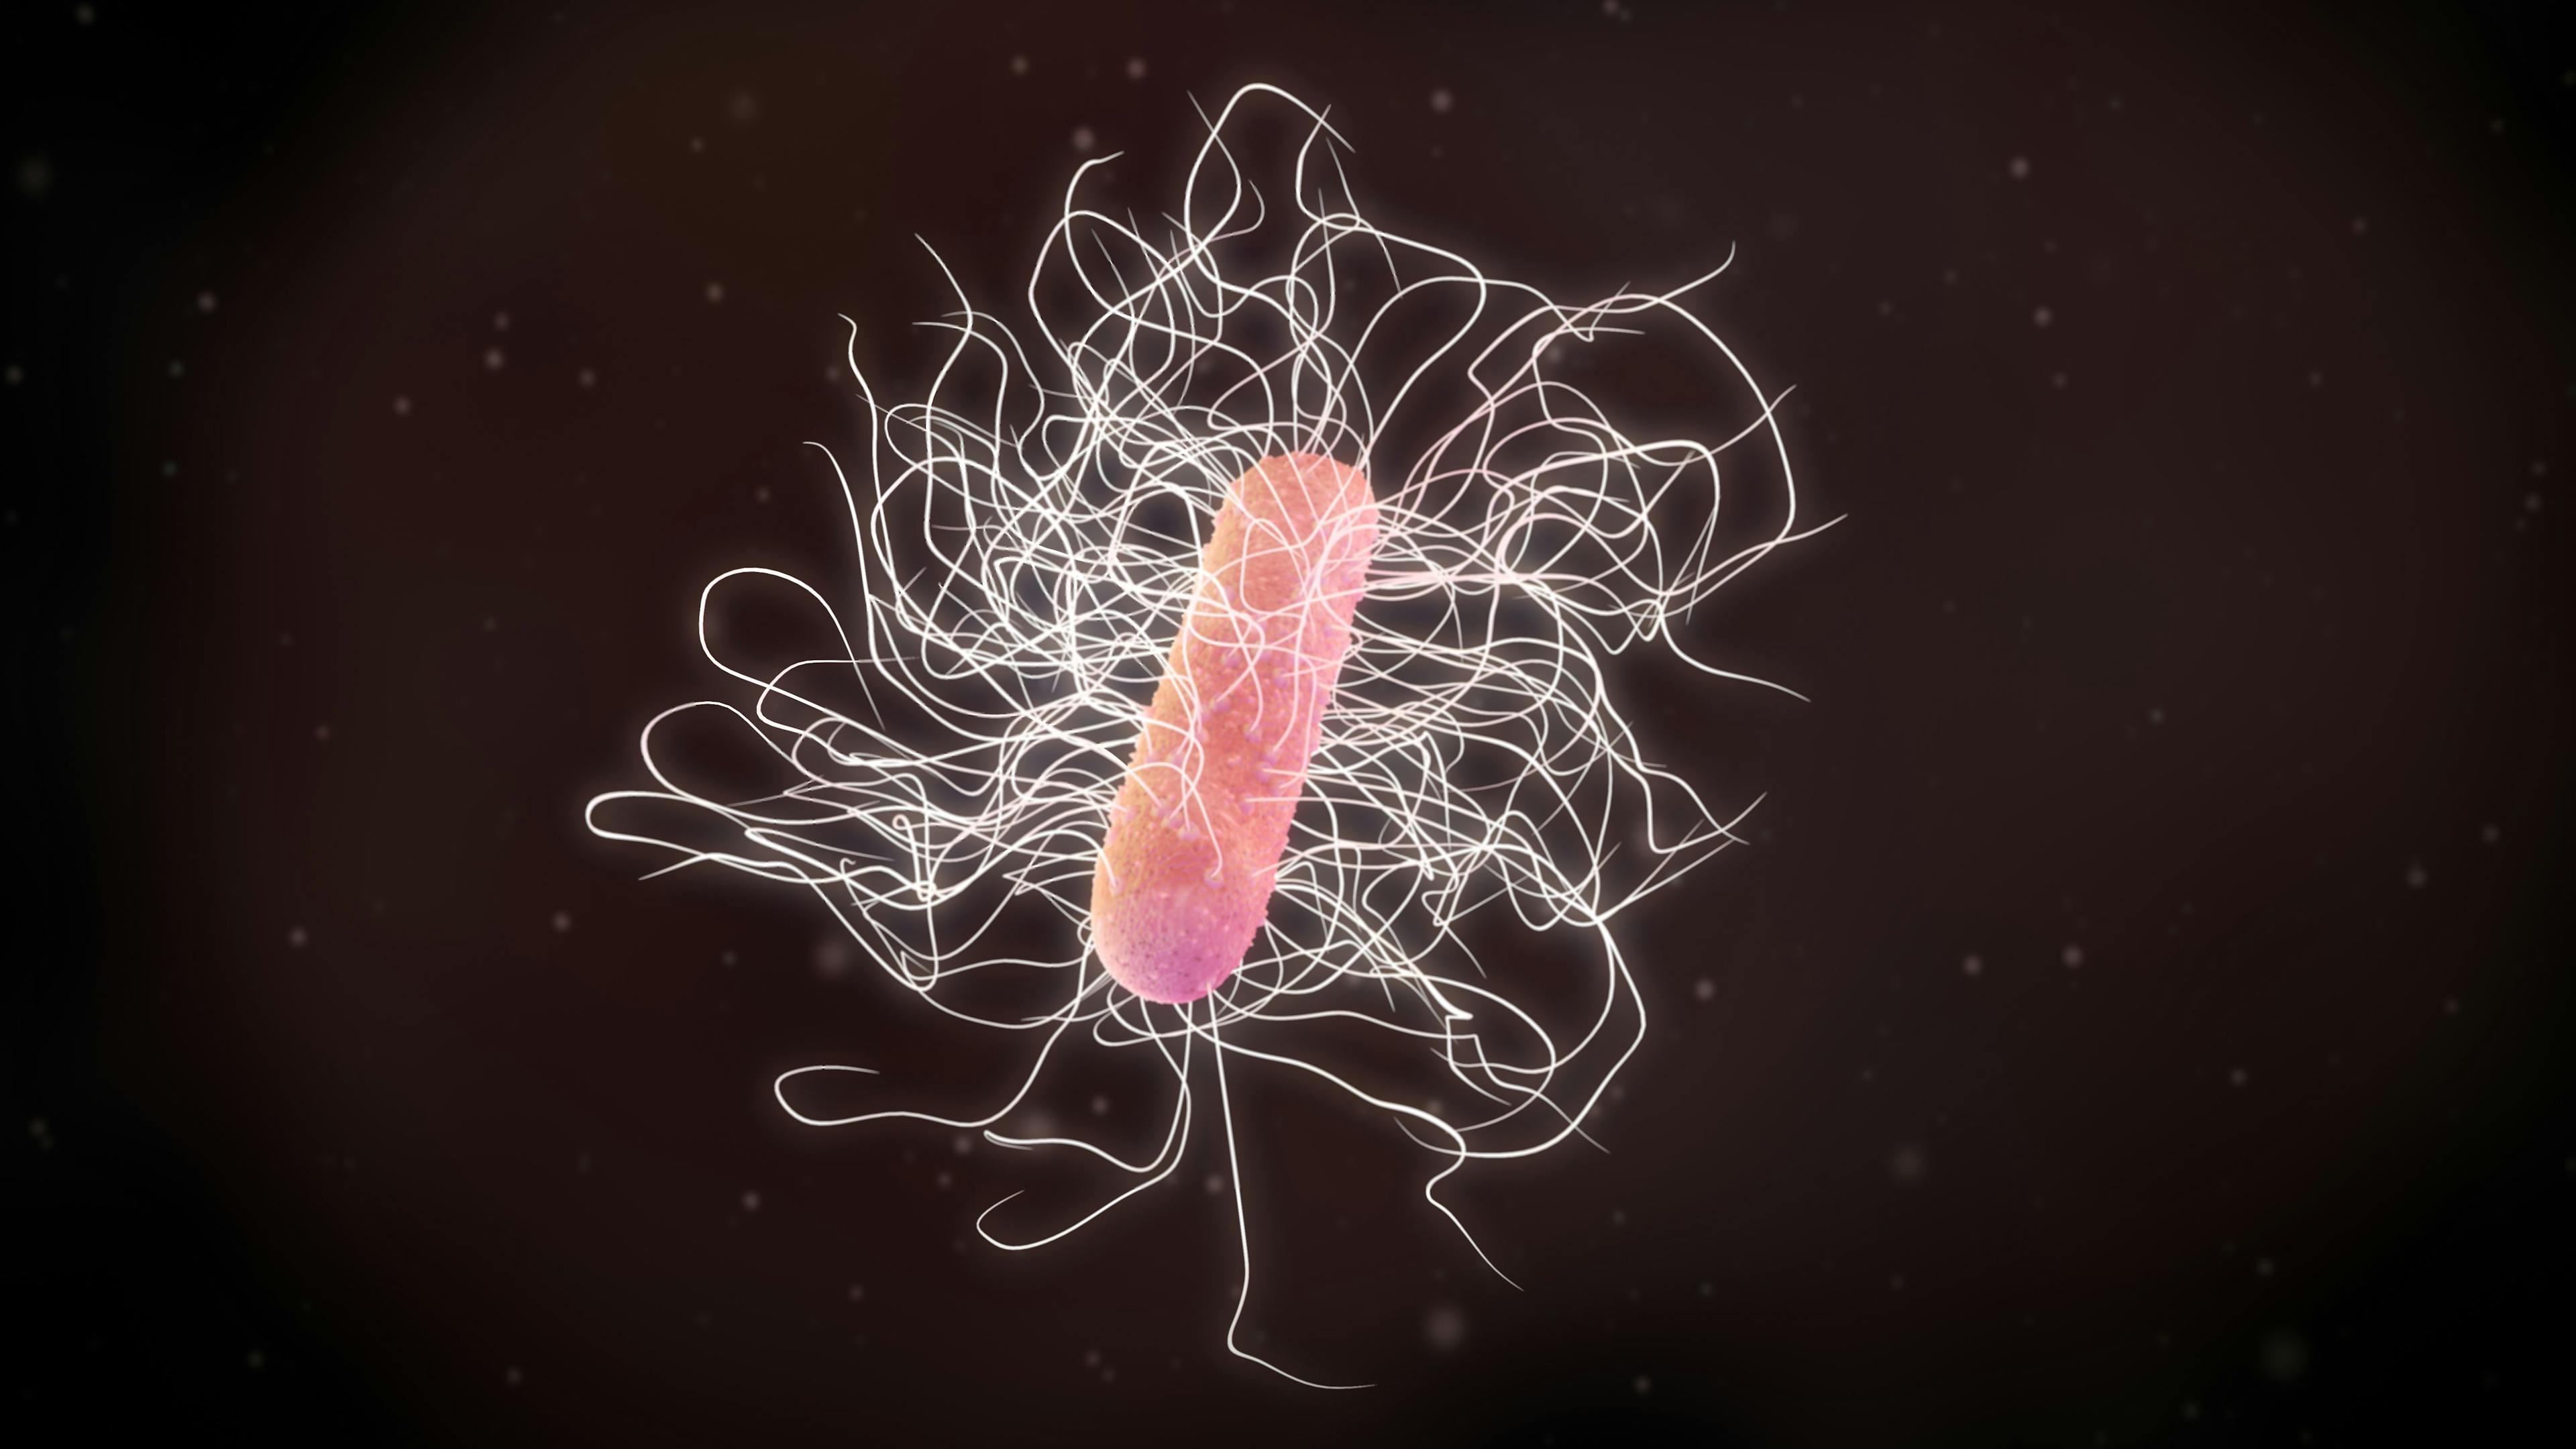 RBX2660, an investigational microbiota-based live biotherapeutic for the treatment of C difficile, safely and effectively reduced recurrent C diff for 6 months.